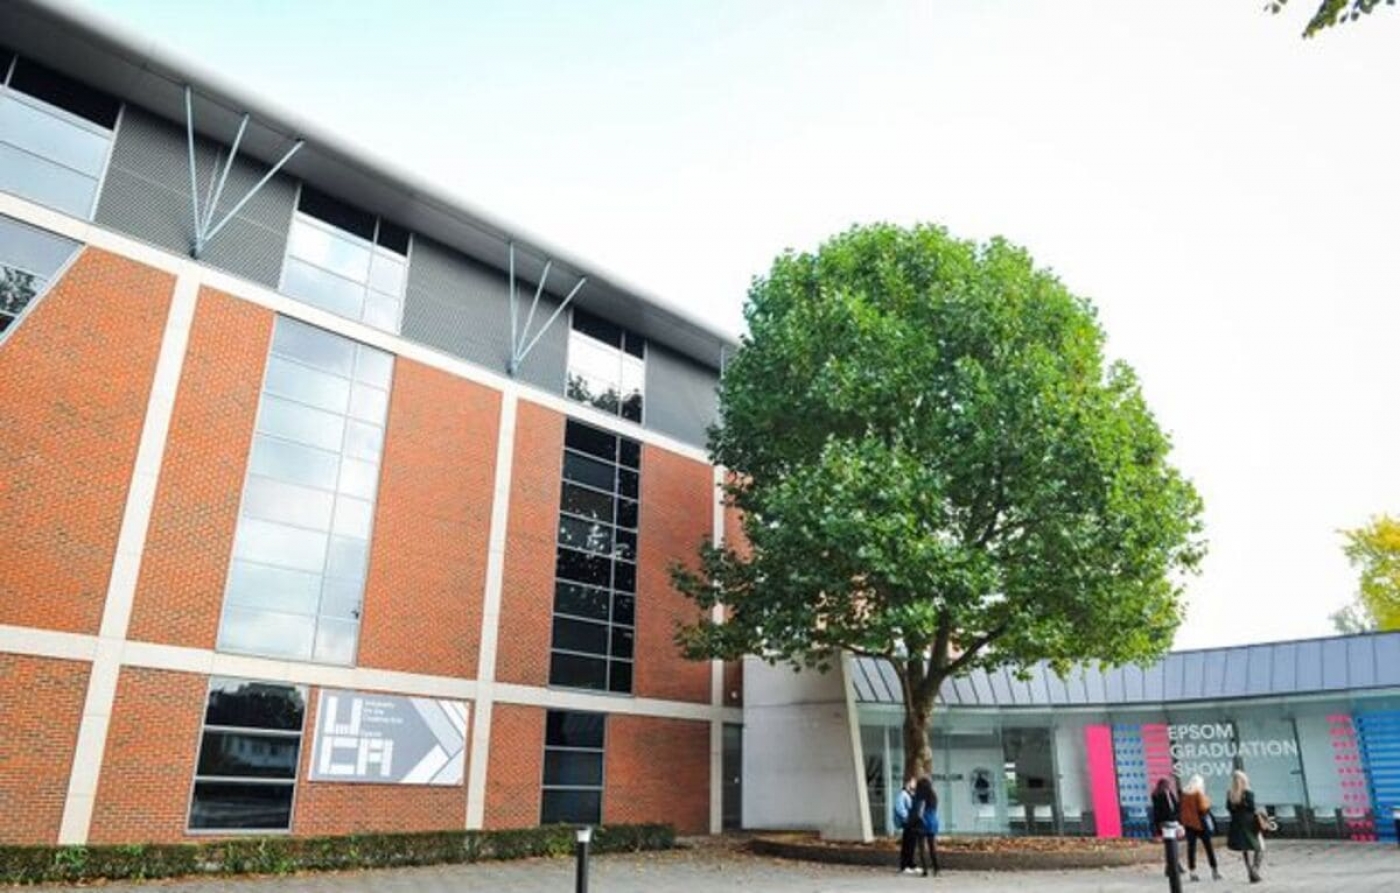 Global University Systems (GUS) - University for the Creative Arts - Epsom Campus